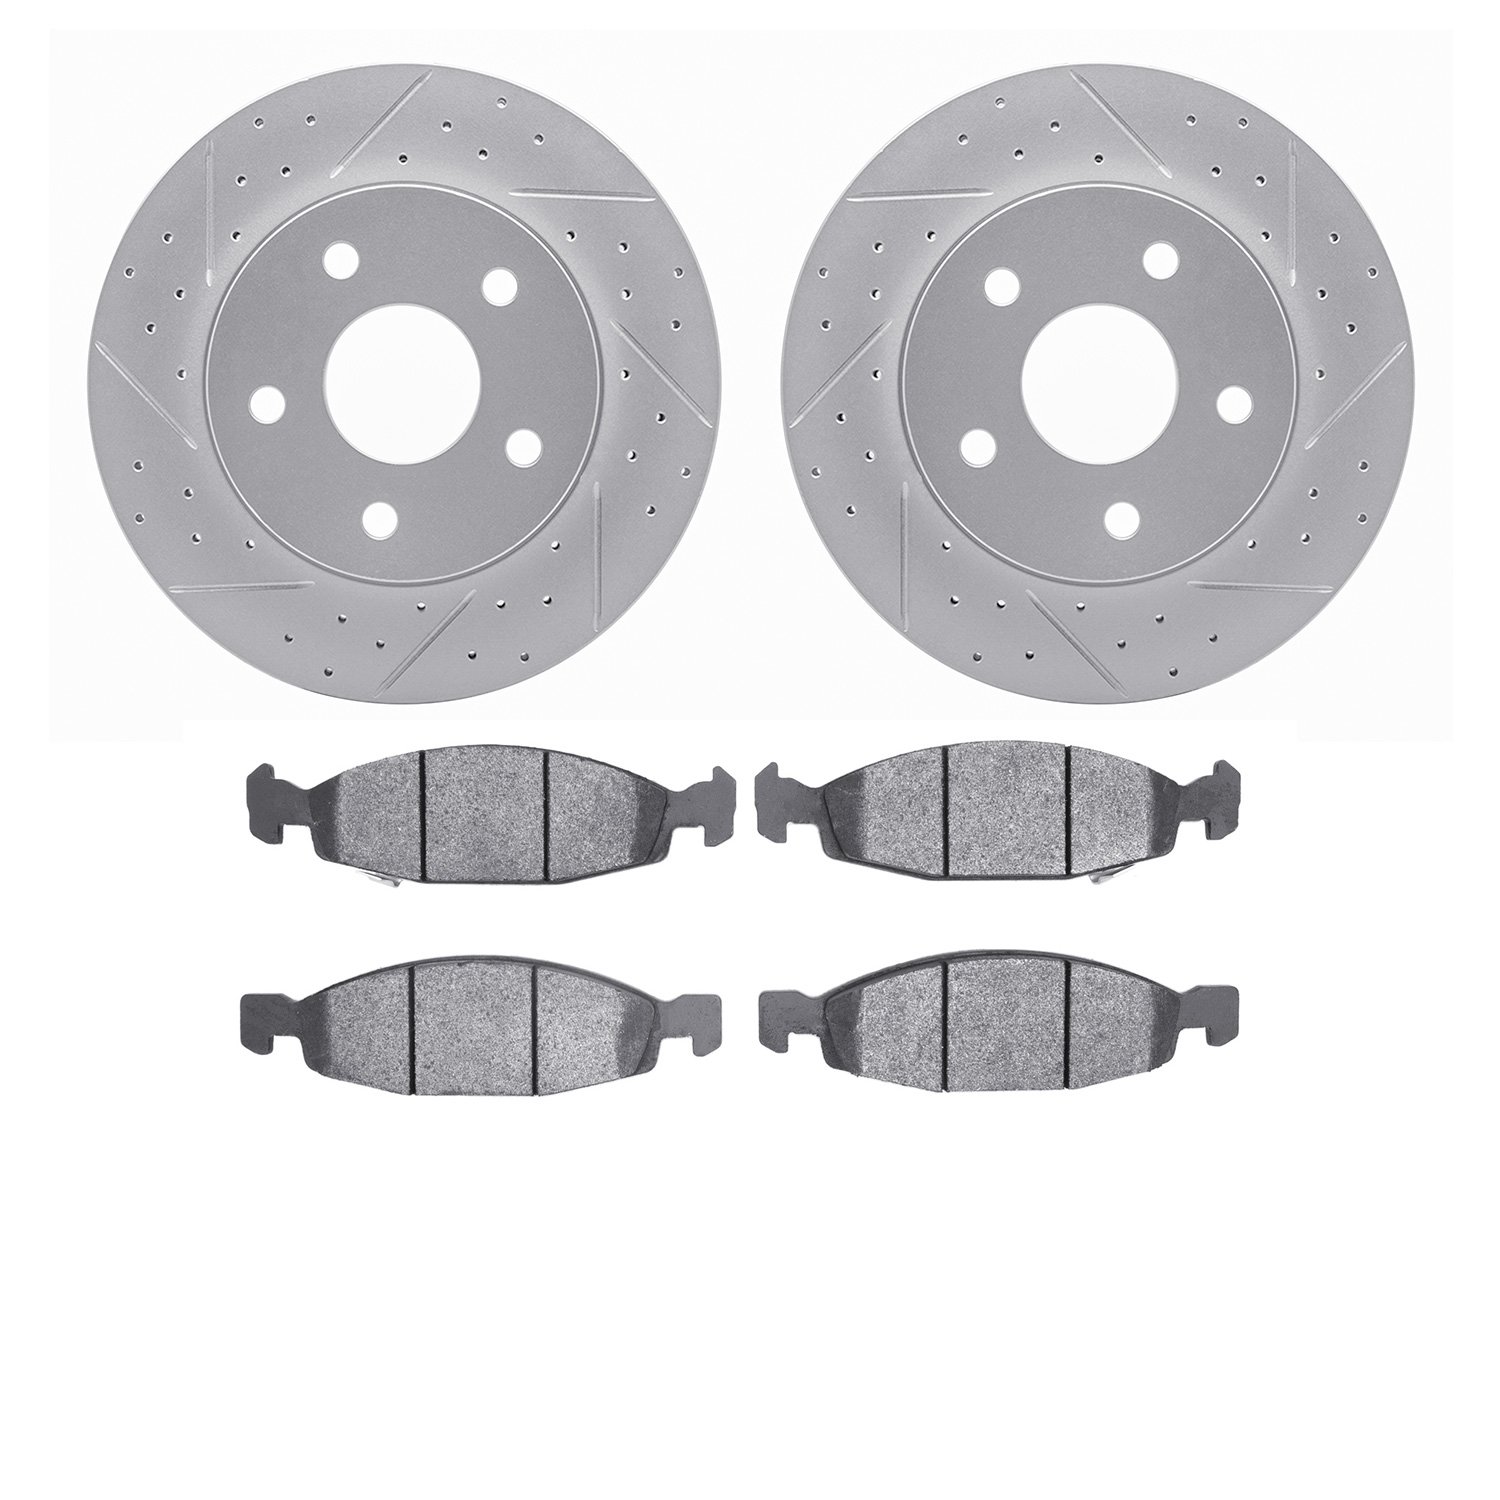 2202-42035 Geoperformance Drilled/Slotted Rotors w/Heavy-Duty Pads Kit, 1999-2002 Mopar, Position: Front